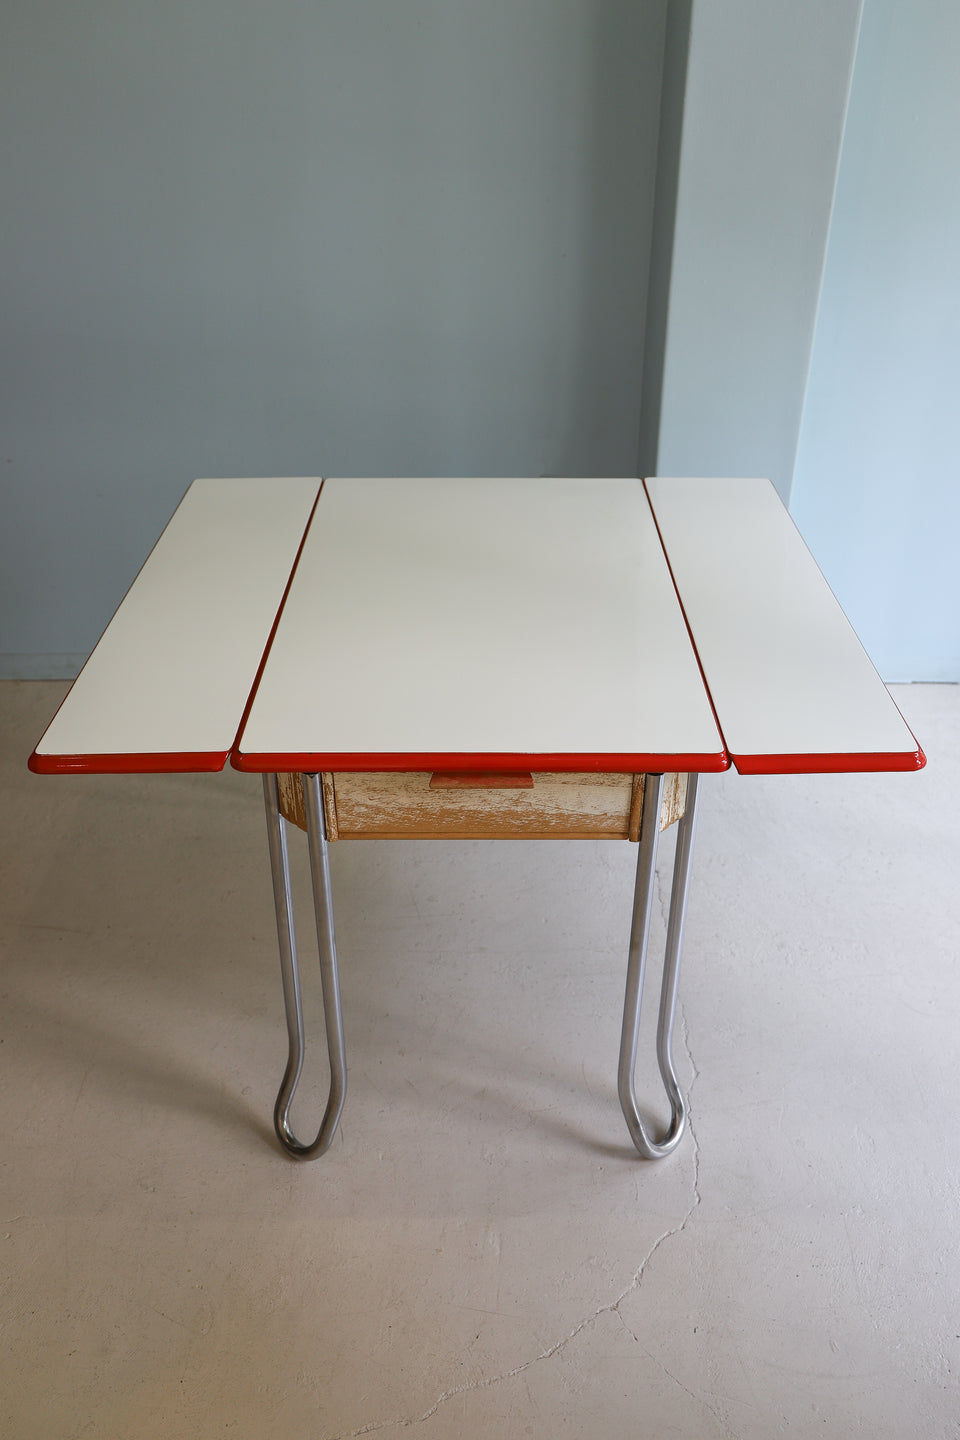 US Vintage Enamel Top Extension Kitchen Table/アメリカヴィンテージ エナメルトップ キッチンテーブル エクステンション